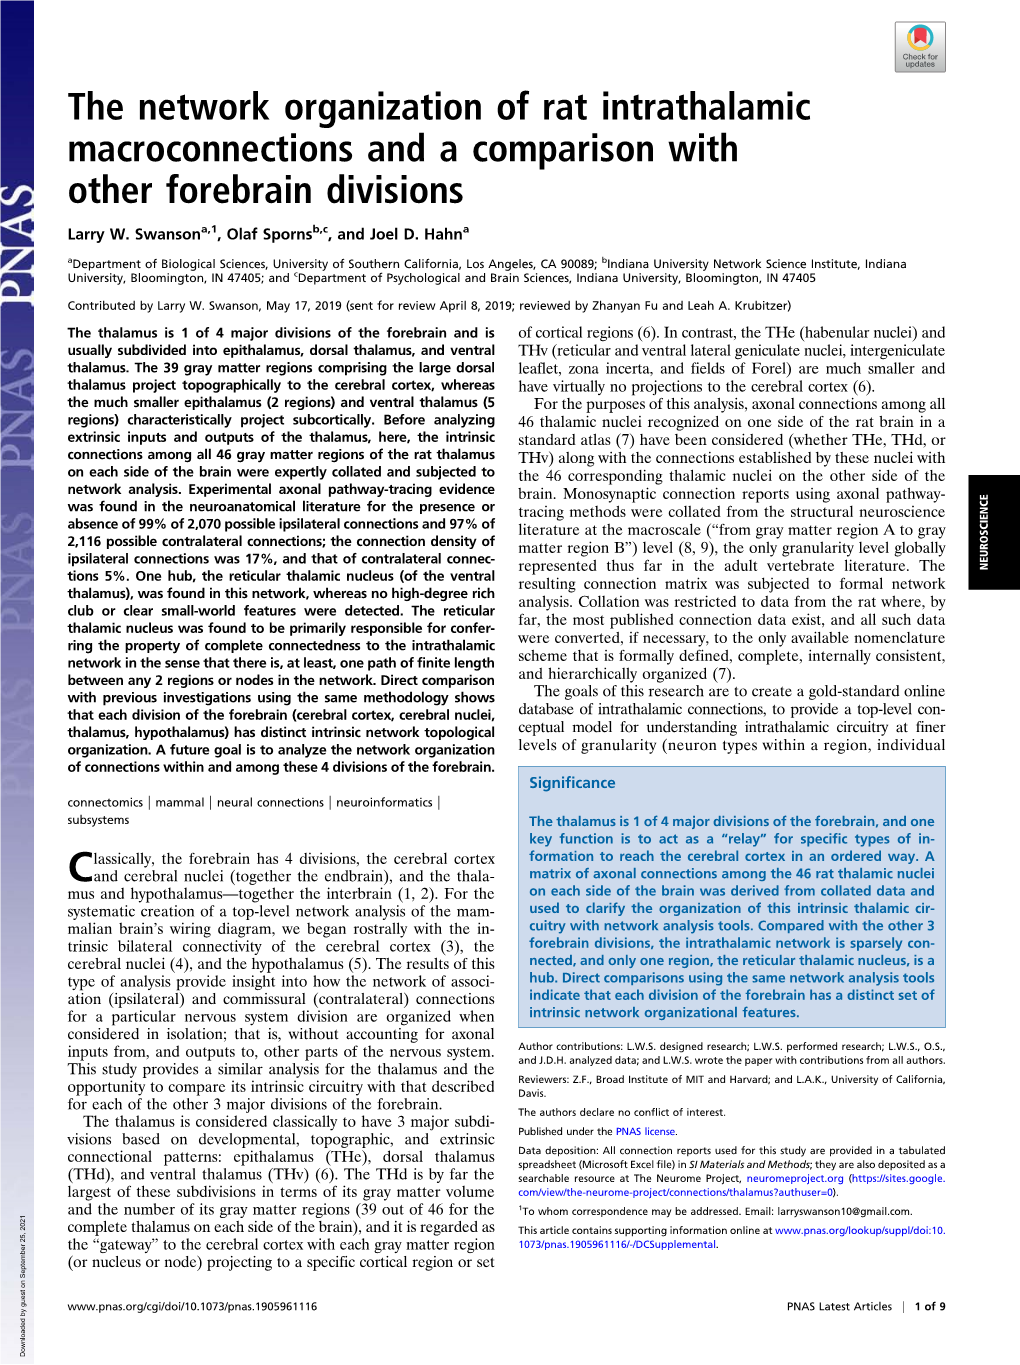 The Network Organization of Rat Intrathalamic Macroconnections and a Comparison with Other Forebrain Divisions